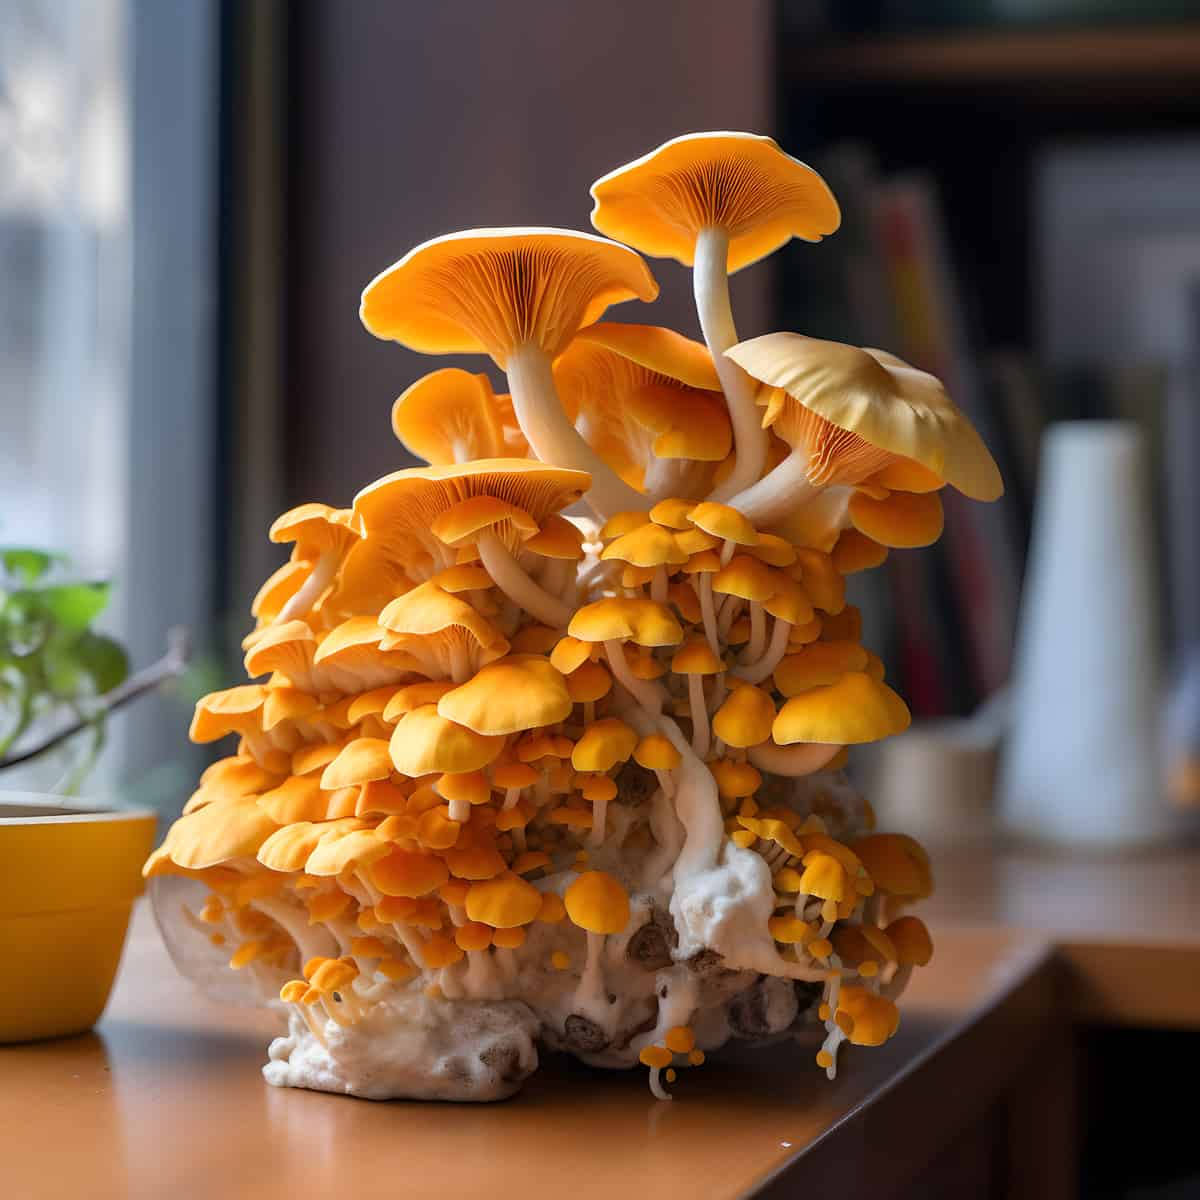 Sweet Tooth Fungus on a kitchen counter